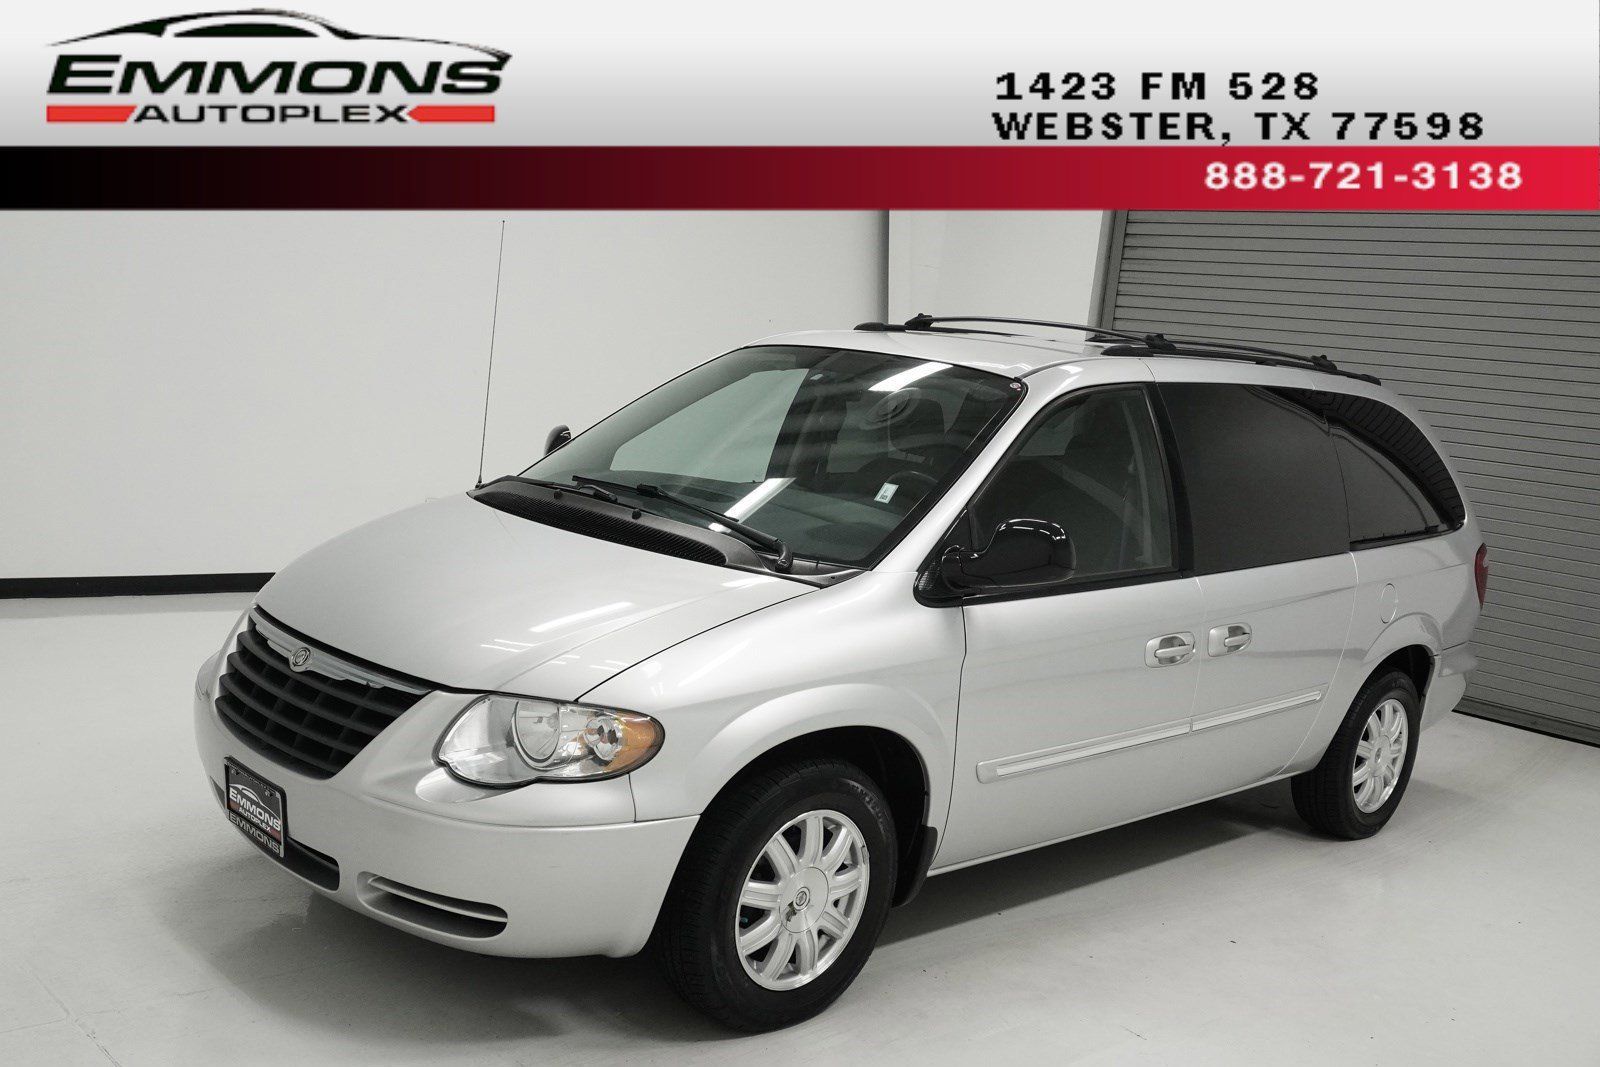 Used 2005 Chrysler Town & Country